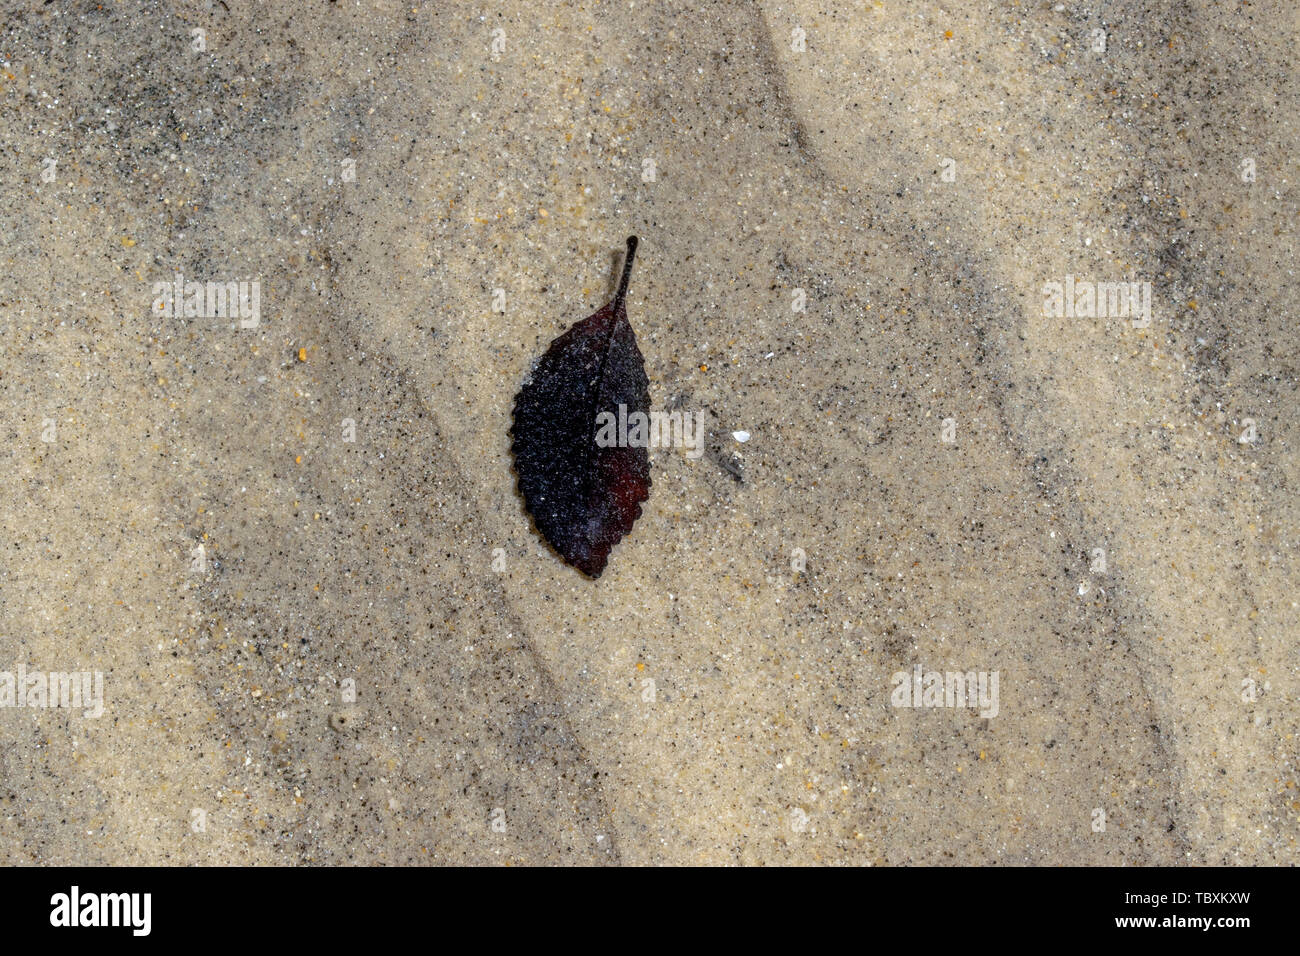 A single leaf lies on the sand under water Stock Photo